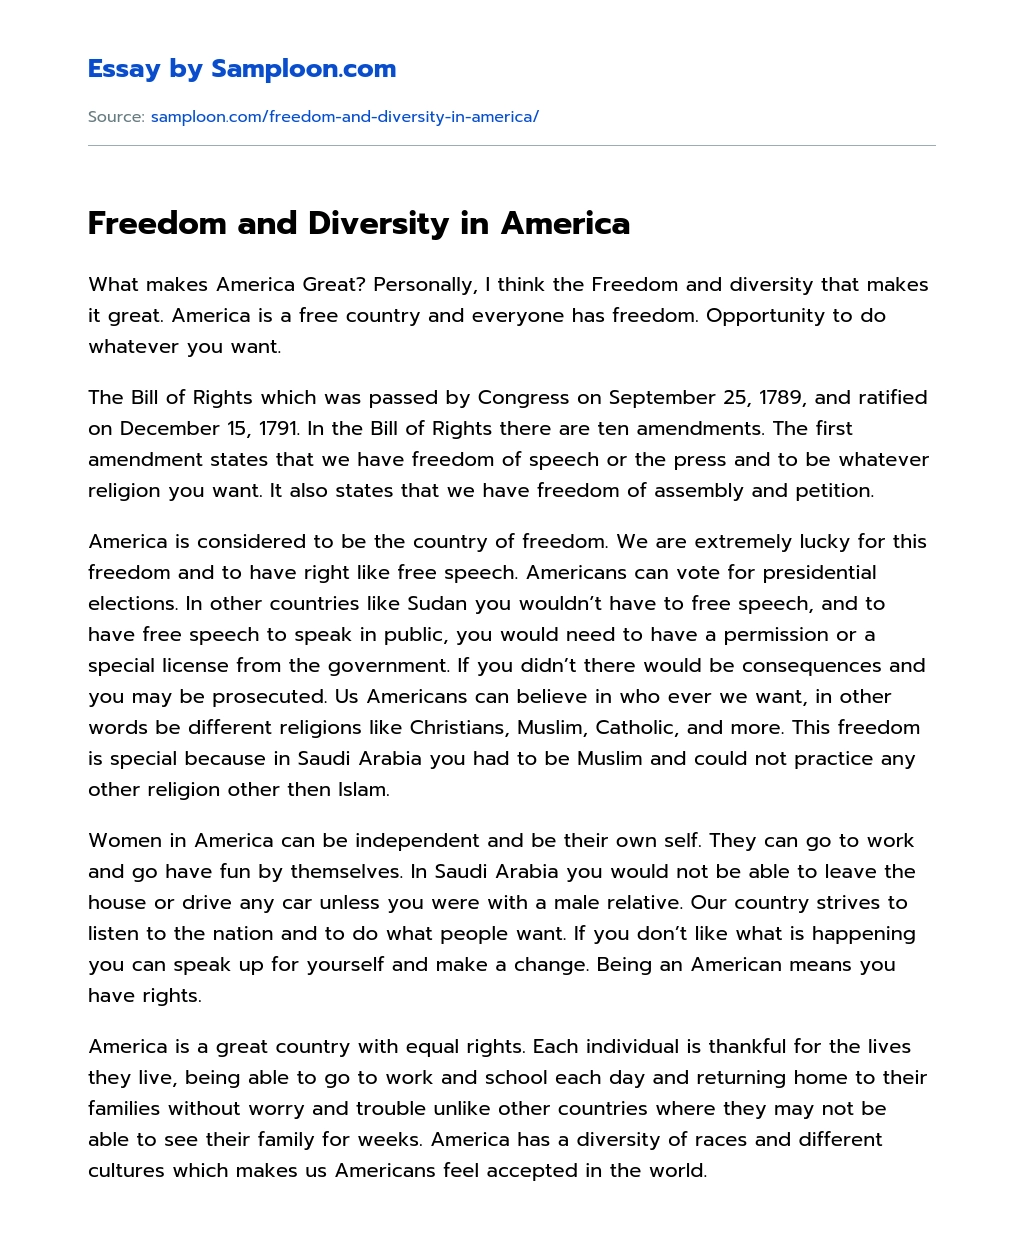 Freedom and Diversity in America essay